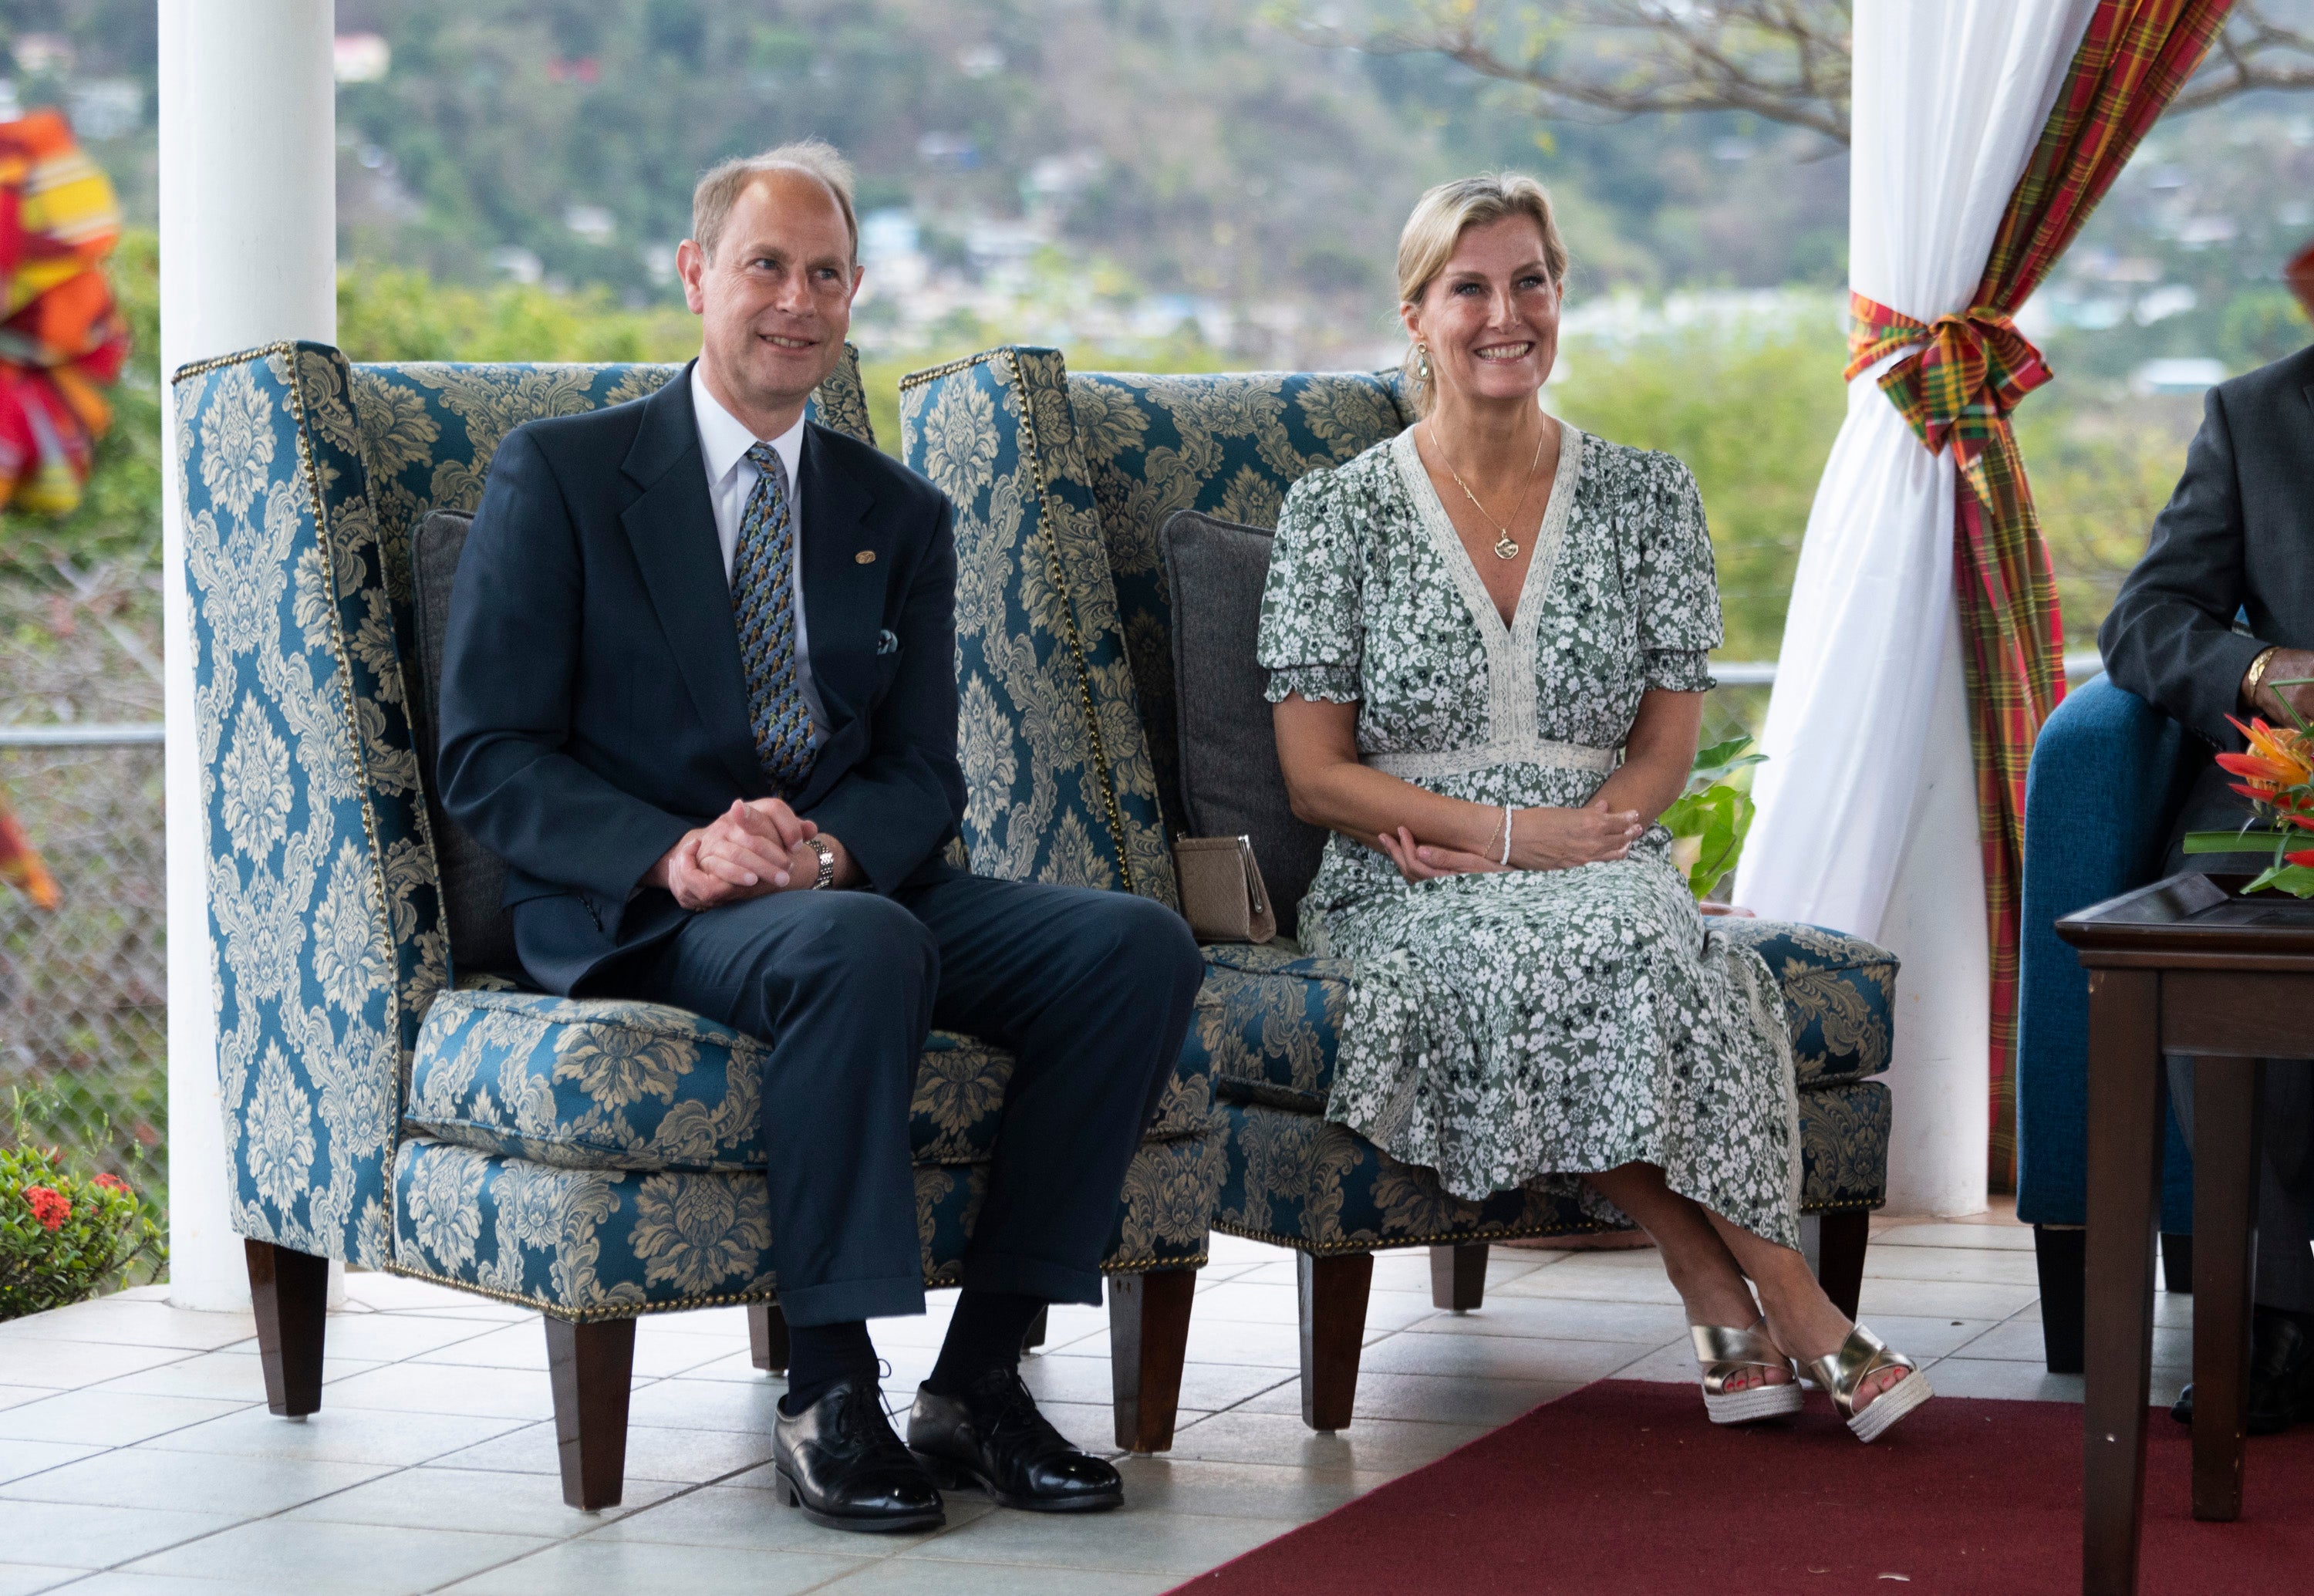 Sophie, Countess of Wessex and Prince Edward, Earl of Wessex attend a Duke Of Edinburgh Awards ceremony at the Prime Minister's residence on April 26, 2022